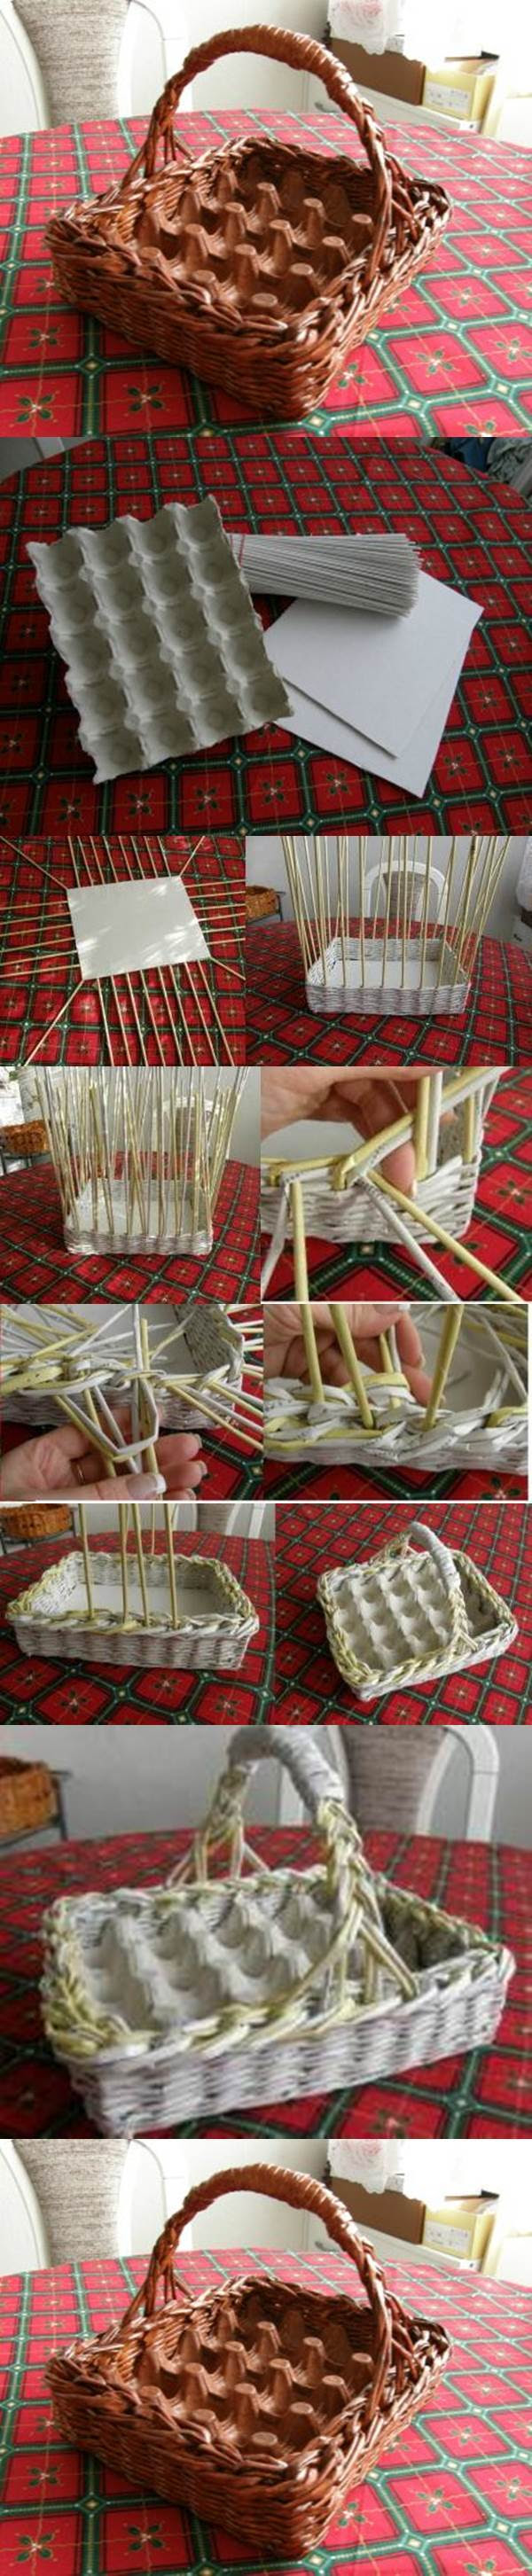 DIY Woven Paper Easter Egg Basket and Tray 2